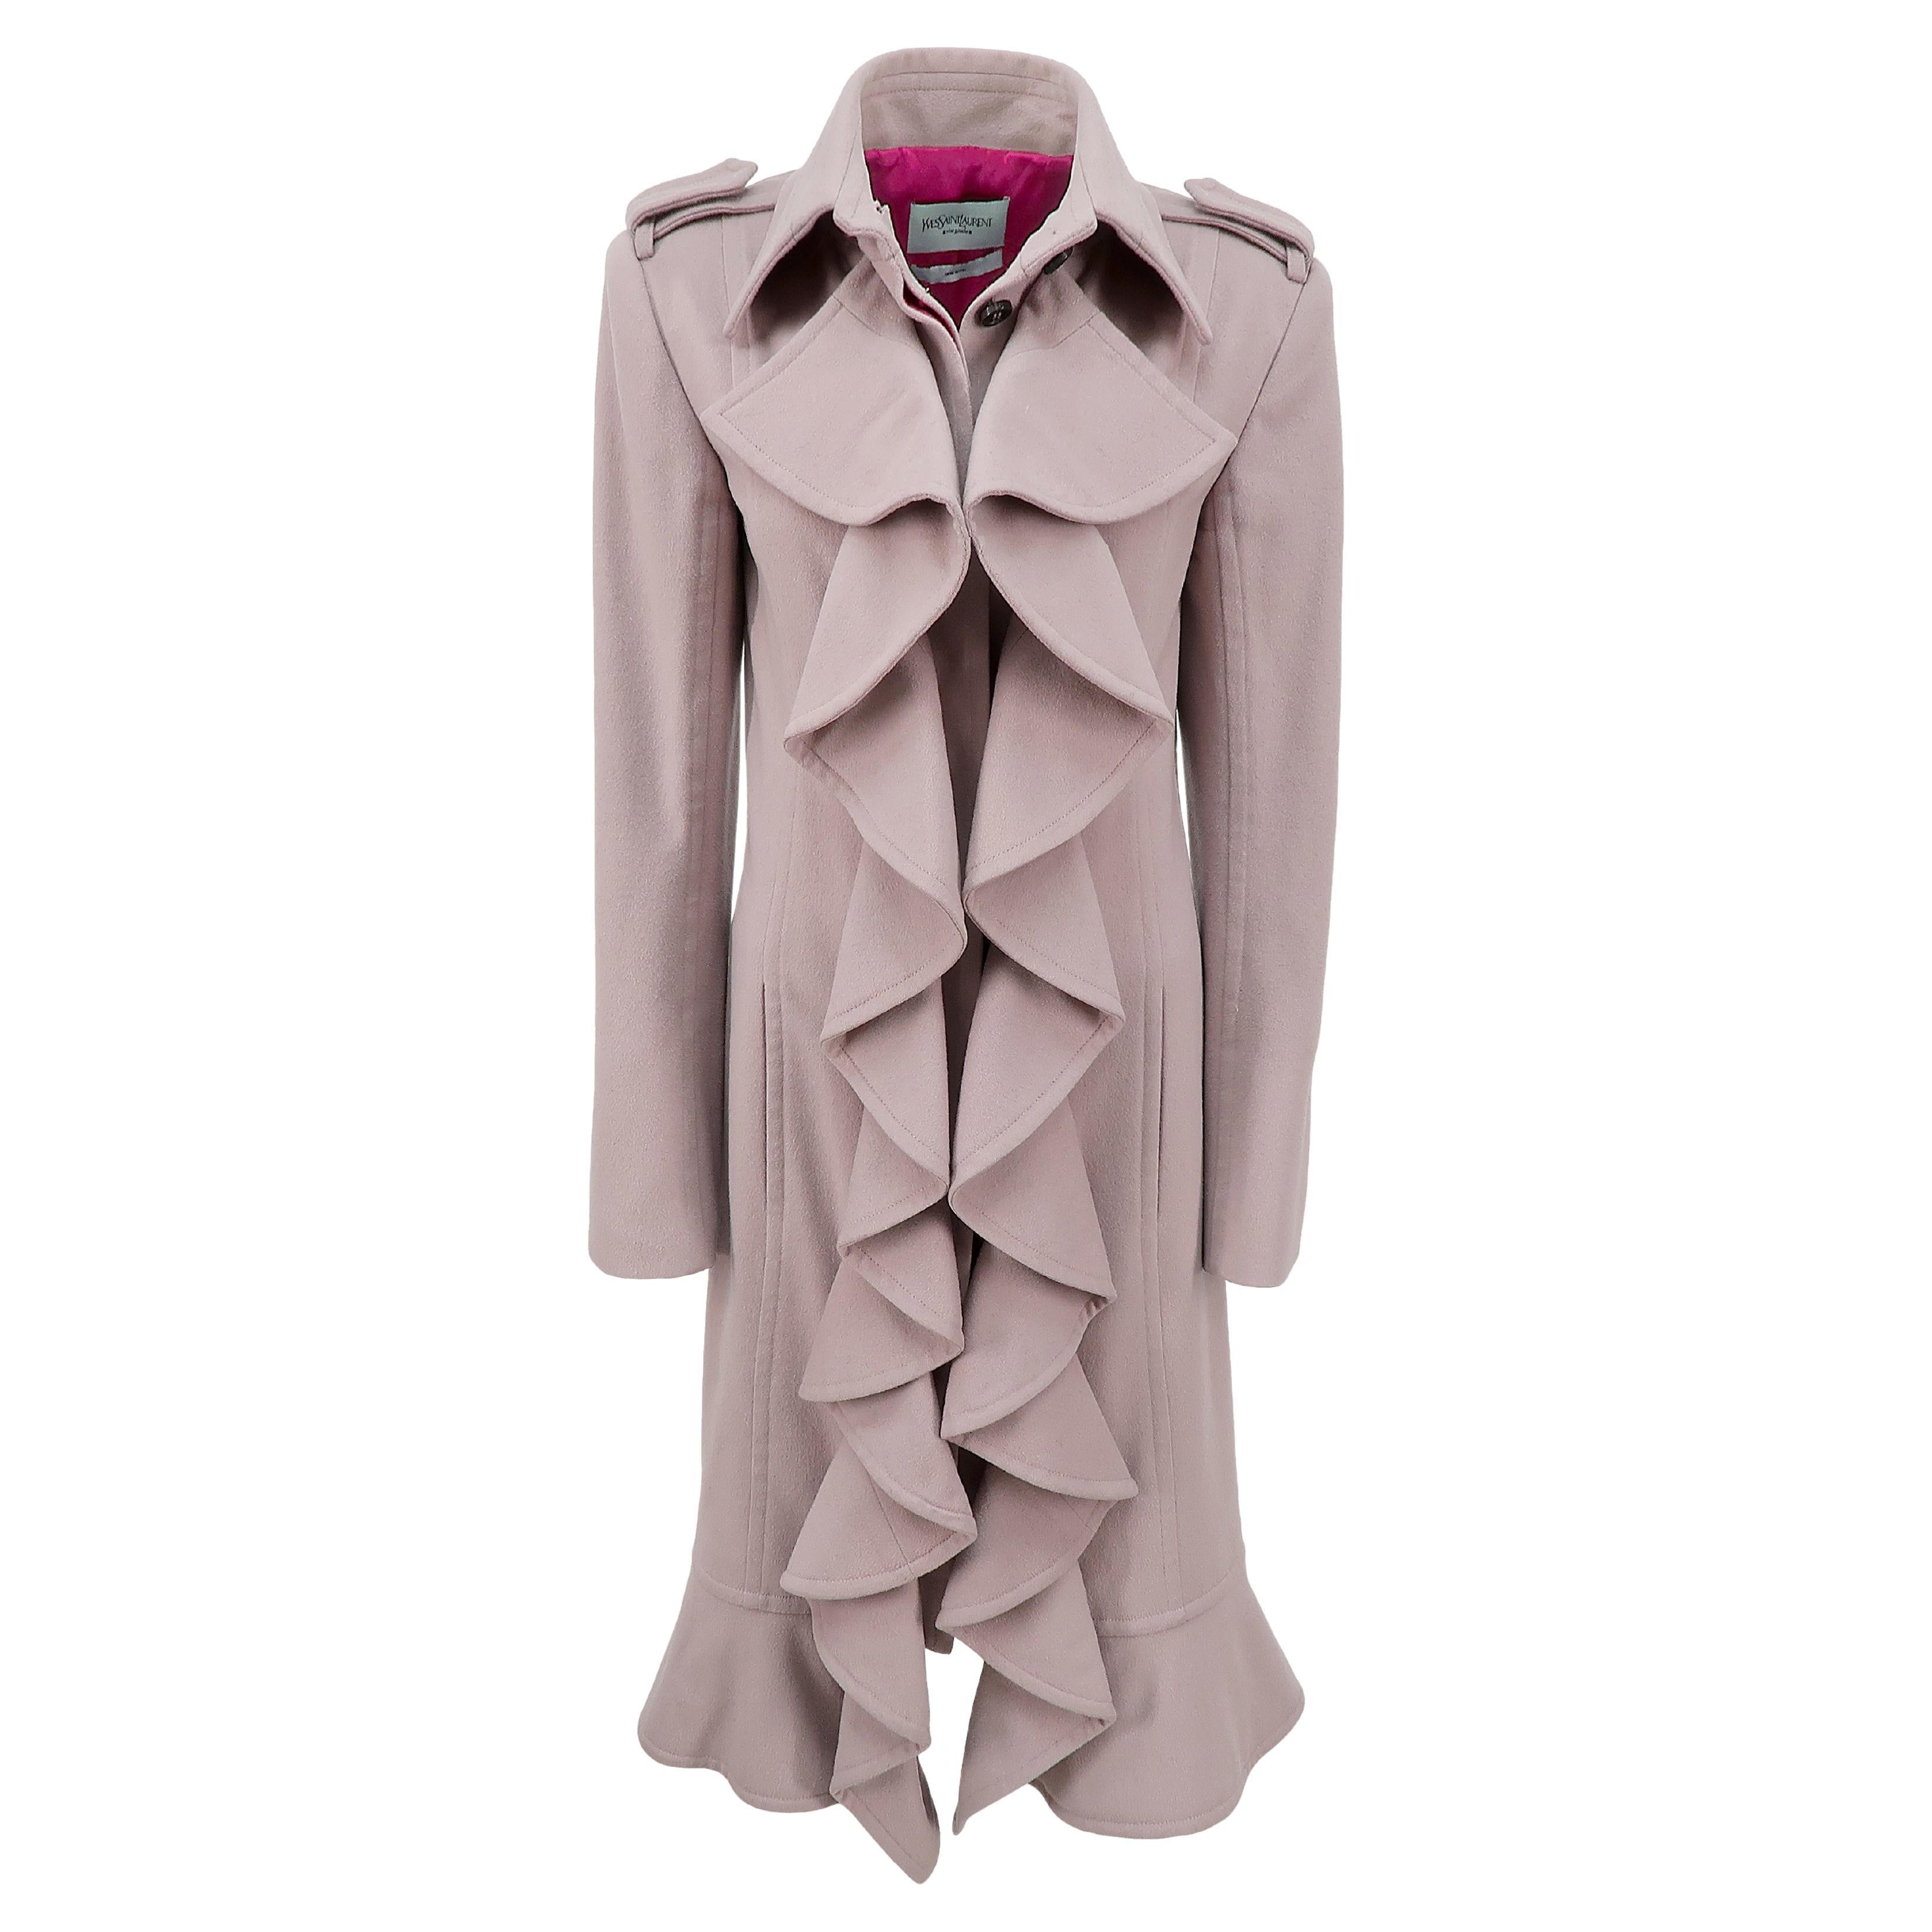 Yves Saint Laurent by Tom Ford FW-2003 Wool Tailored Coat with Ruffle Detailing For Sale